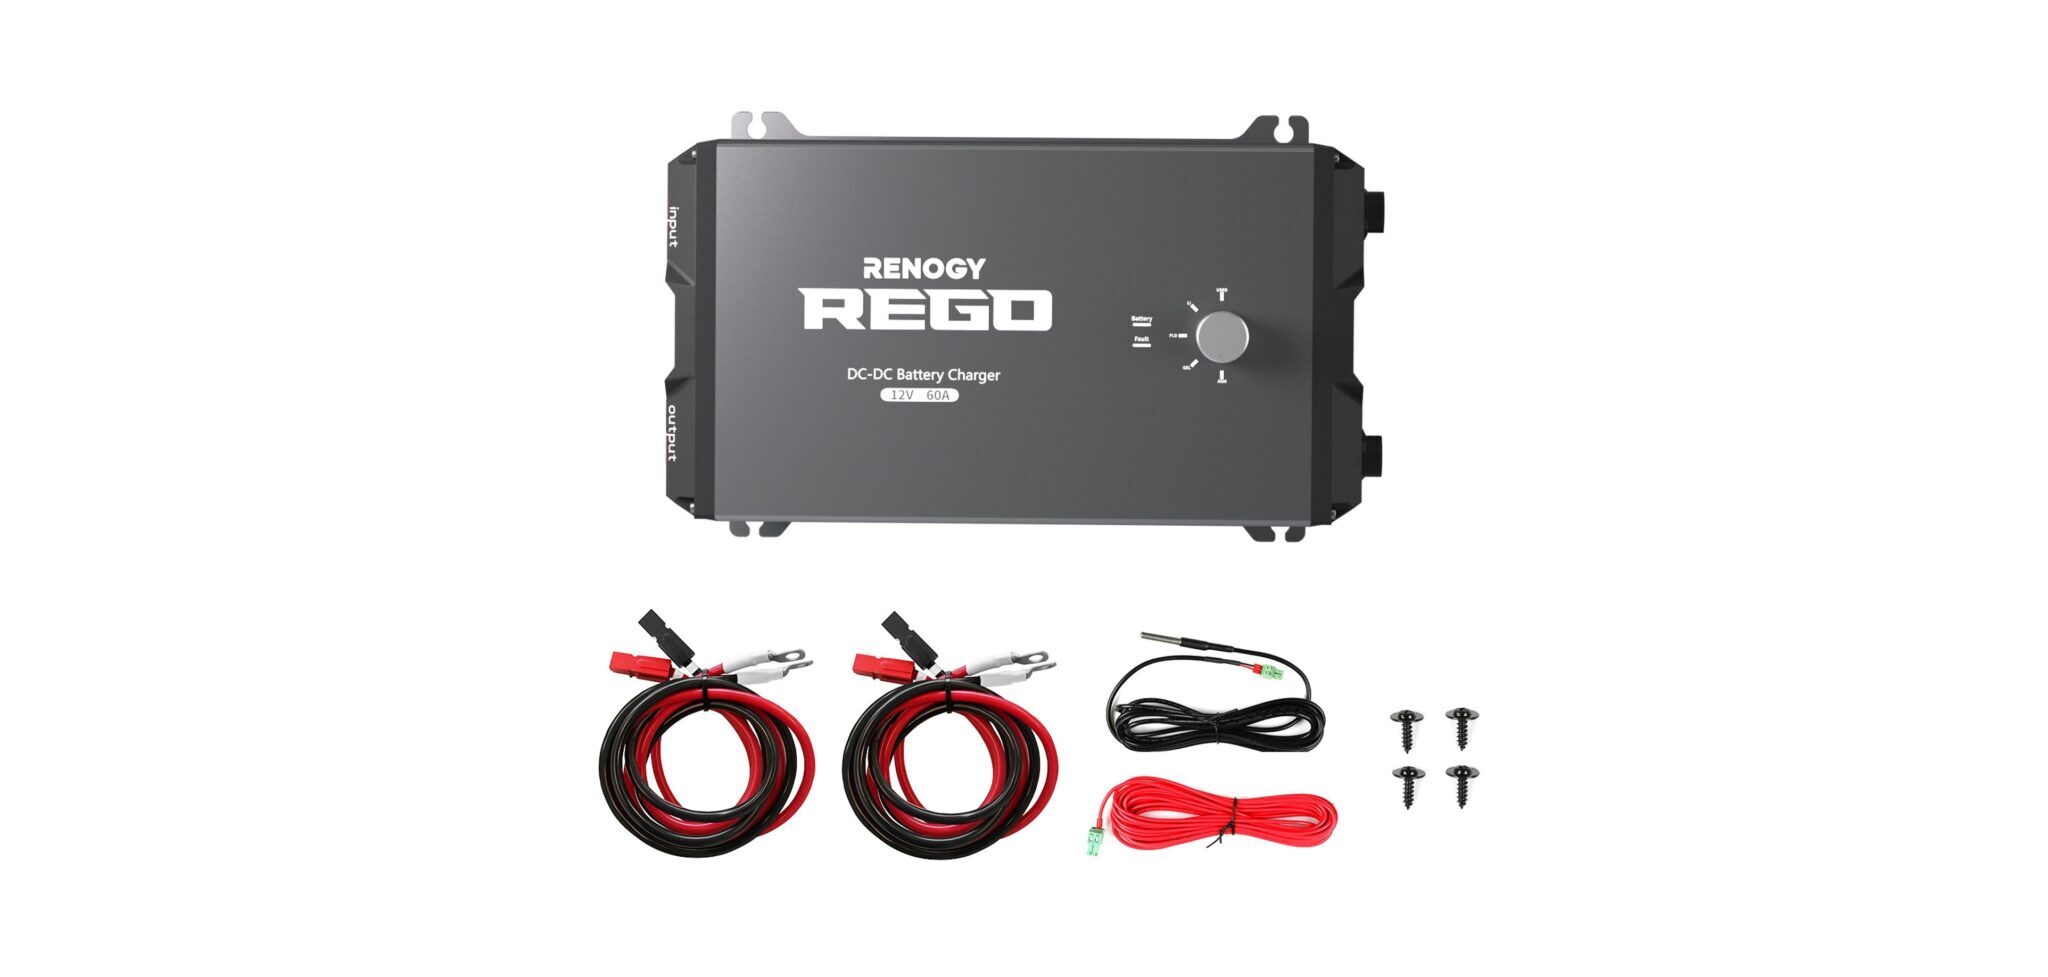 REGO DC-DC Battery Charger